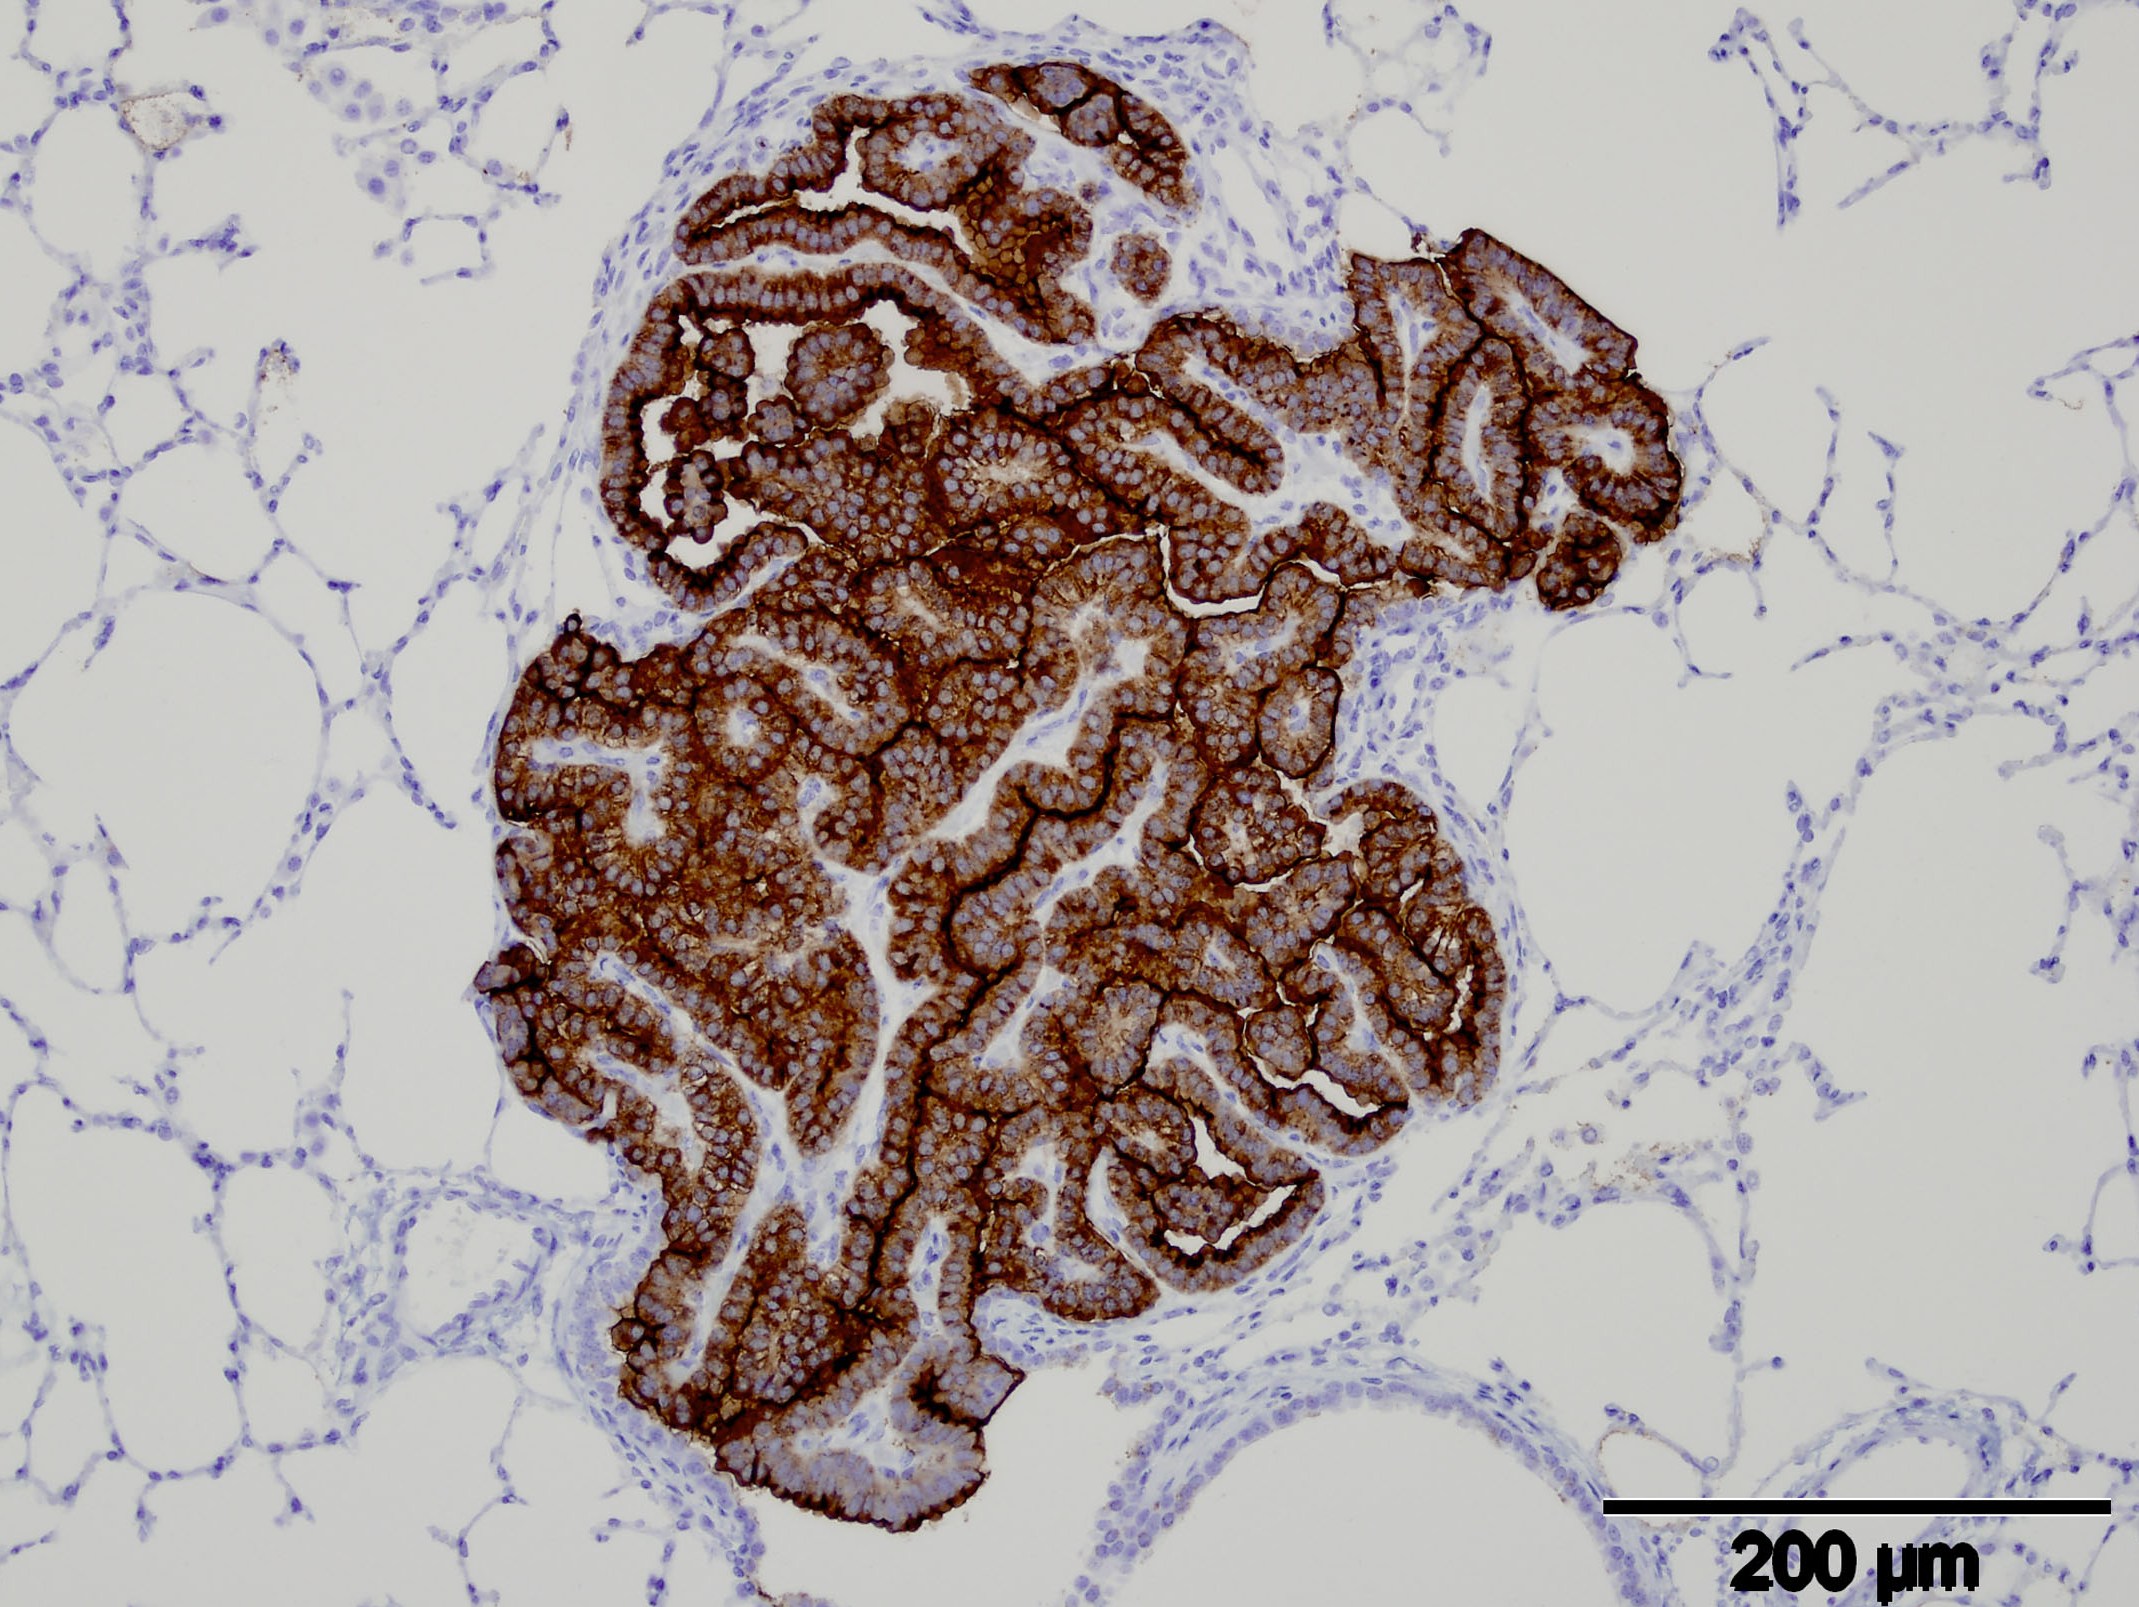 The brown staining shows new virus particles in the cancerous cells of the lung